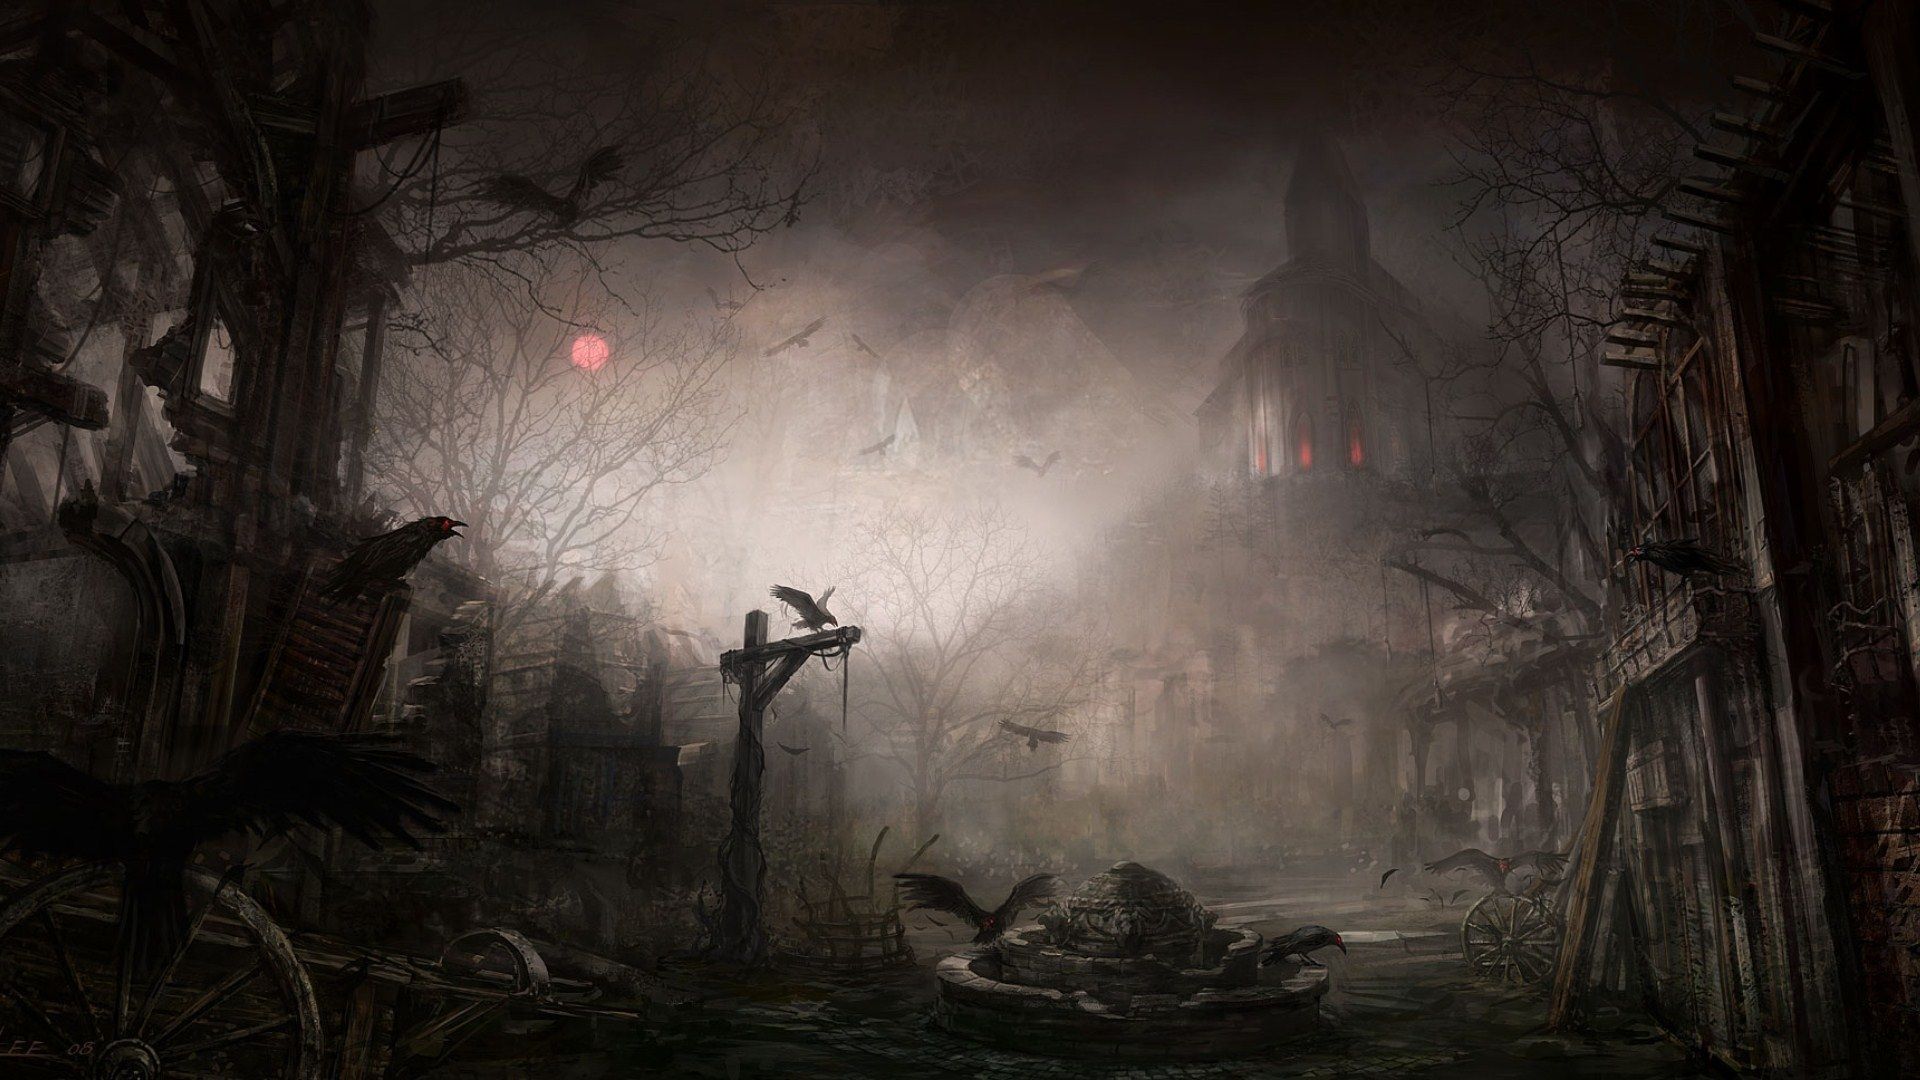 1920x1080 Download Creepy Landscape Wallpaper 1080p For Iphone Pc Desktop Android Or Mac Desktop Hd Scary Background Gothic Wallpaper Fantasy City